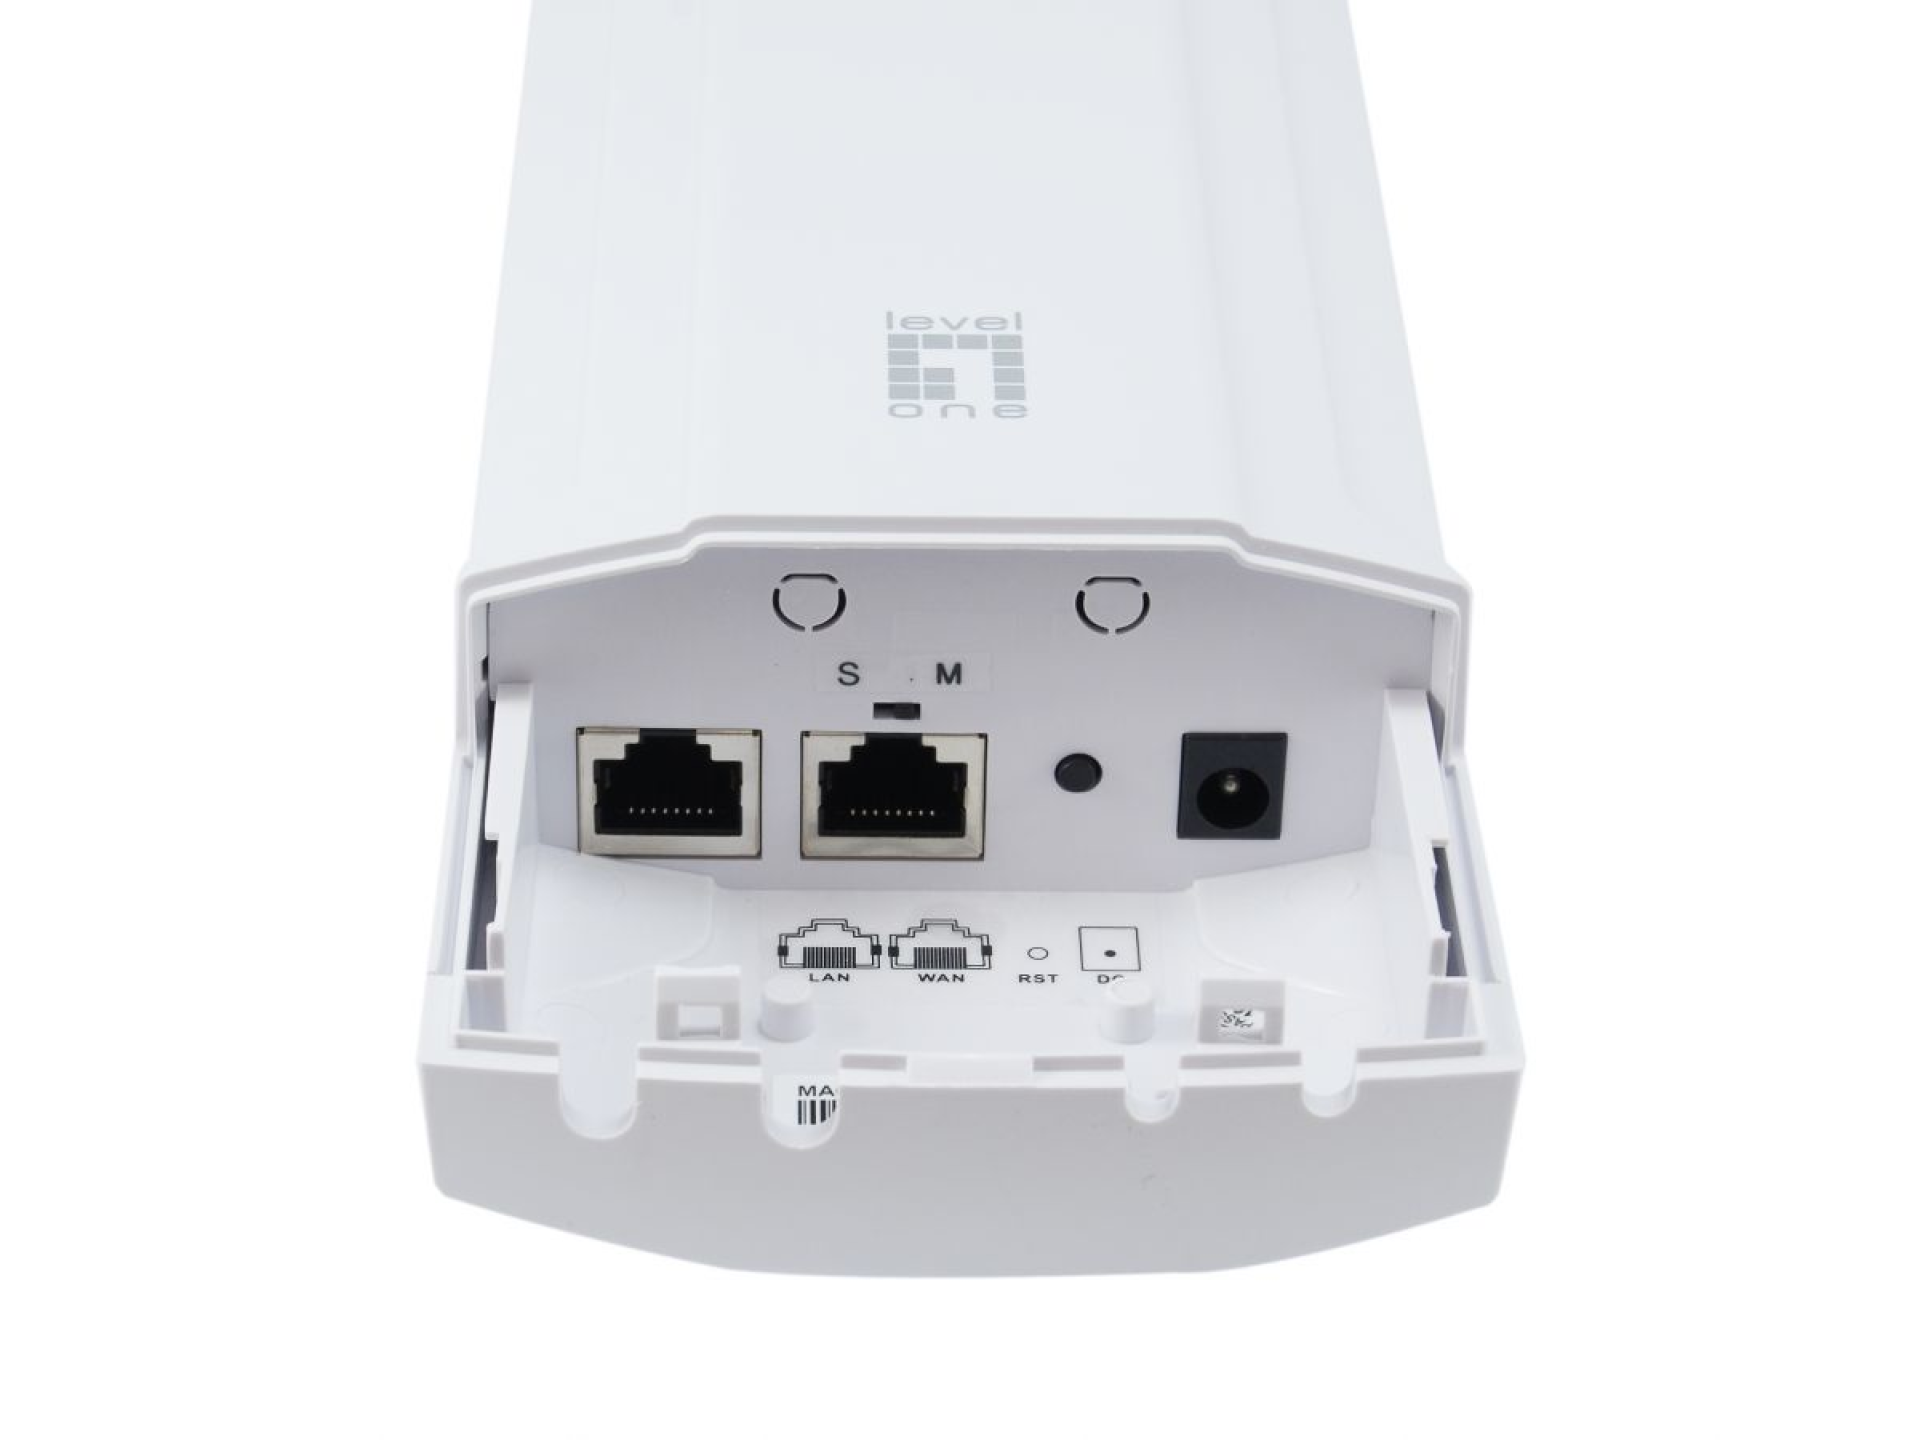 AC900 5GHz Outdoor PoE Wireless (WLAN) Access Point